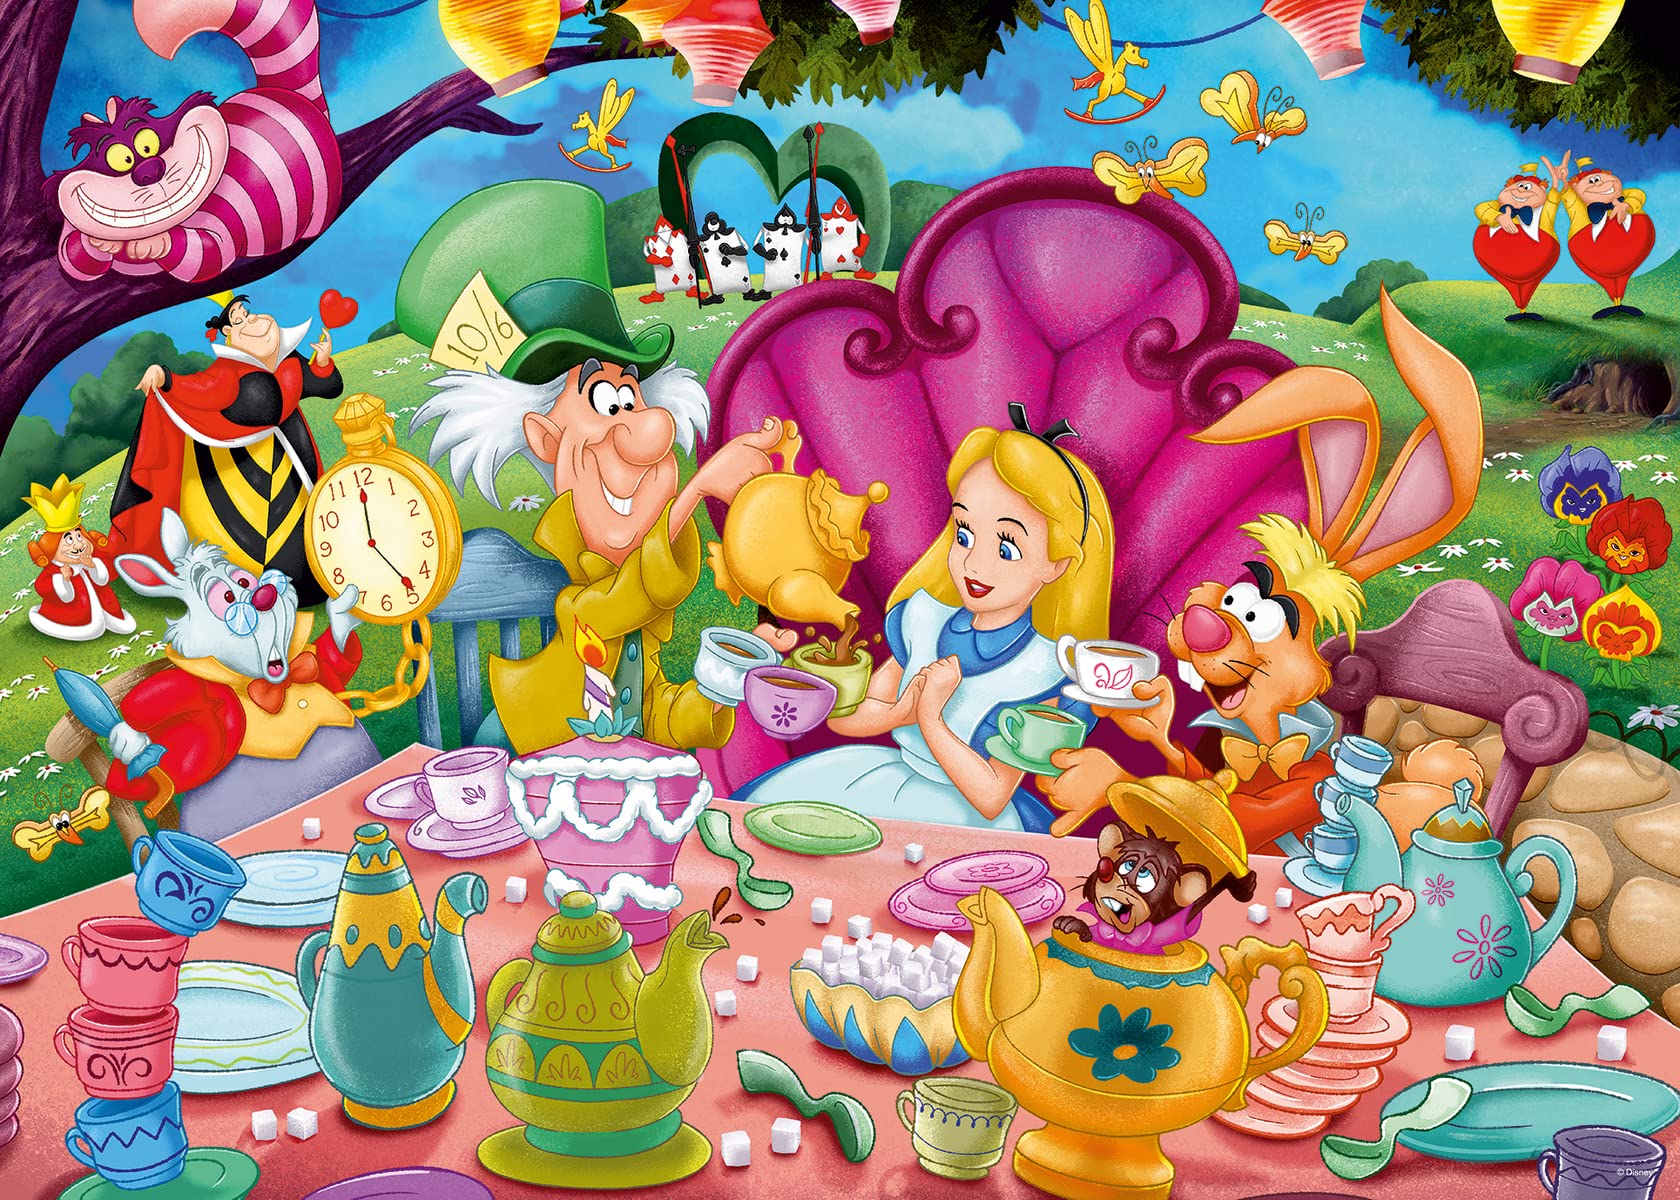 Ravensburger Alice in Wonderland 1000 Piece Jigsaw Puzzle for Adults - 16737 - Every Piece is Unique, Softclick Technology Means Pieces Fit Together Perfectly